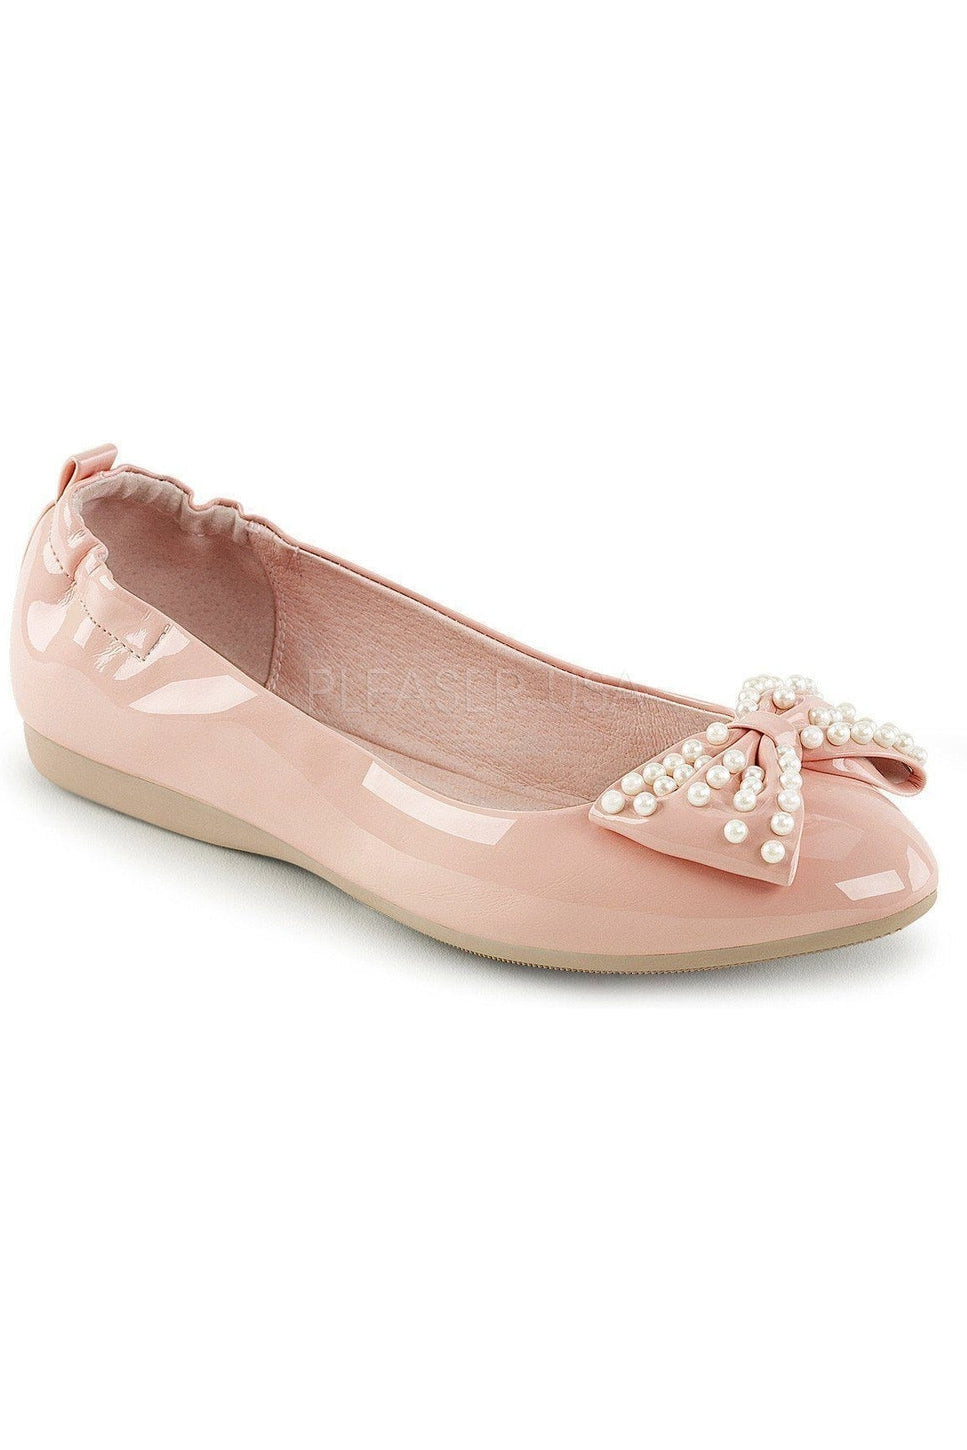 IVY-09-Pink-Pin Up Couture-Pink-Flats-SEXYSHOES.COM